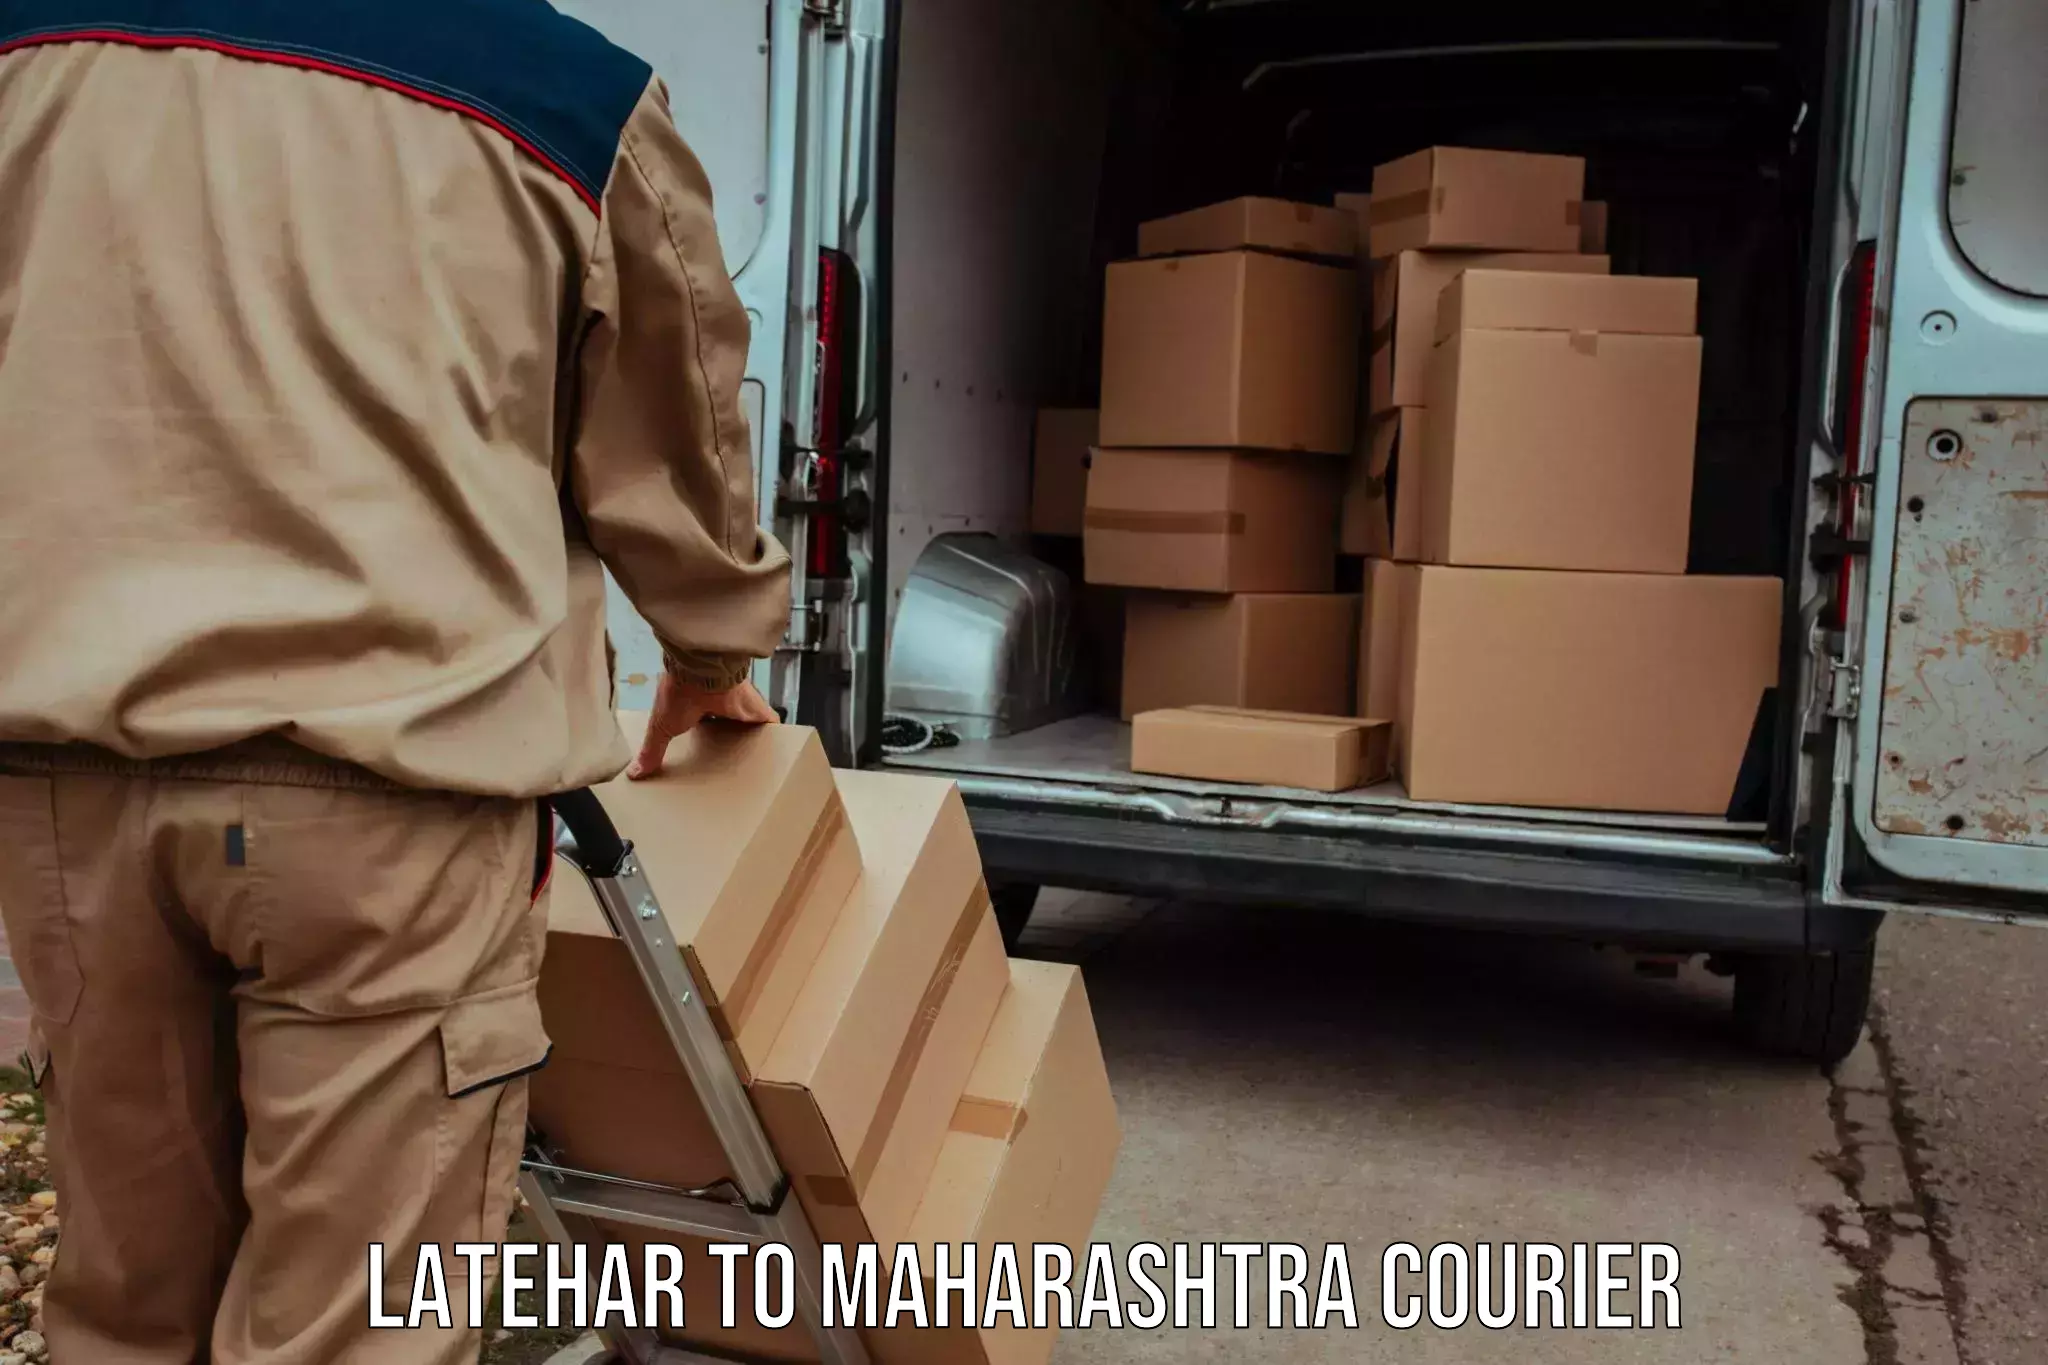 State-of-the-art courier technology Latehar to Ambegaon